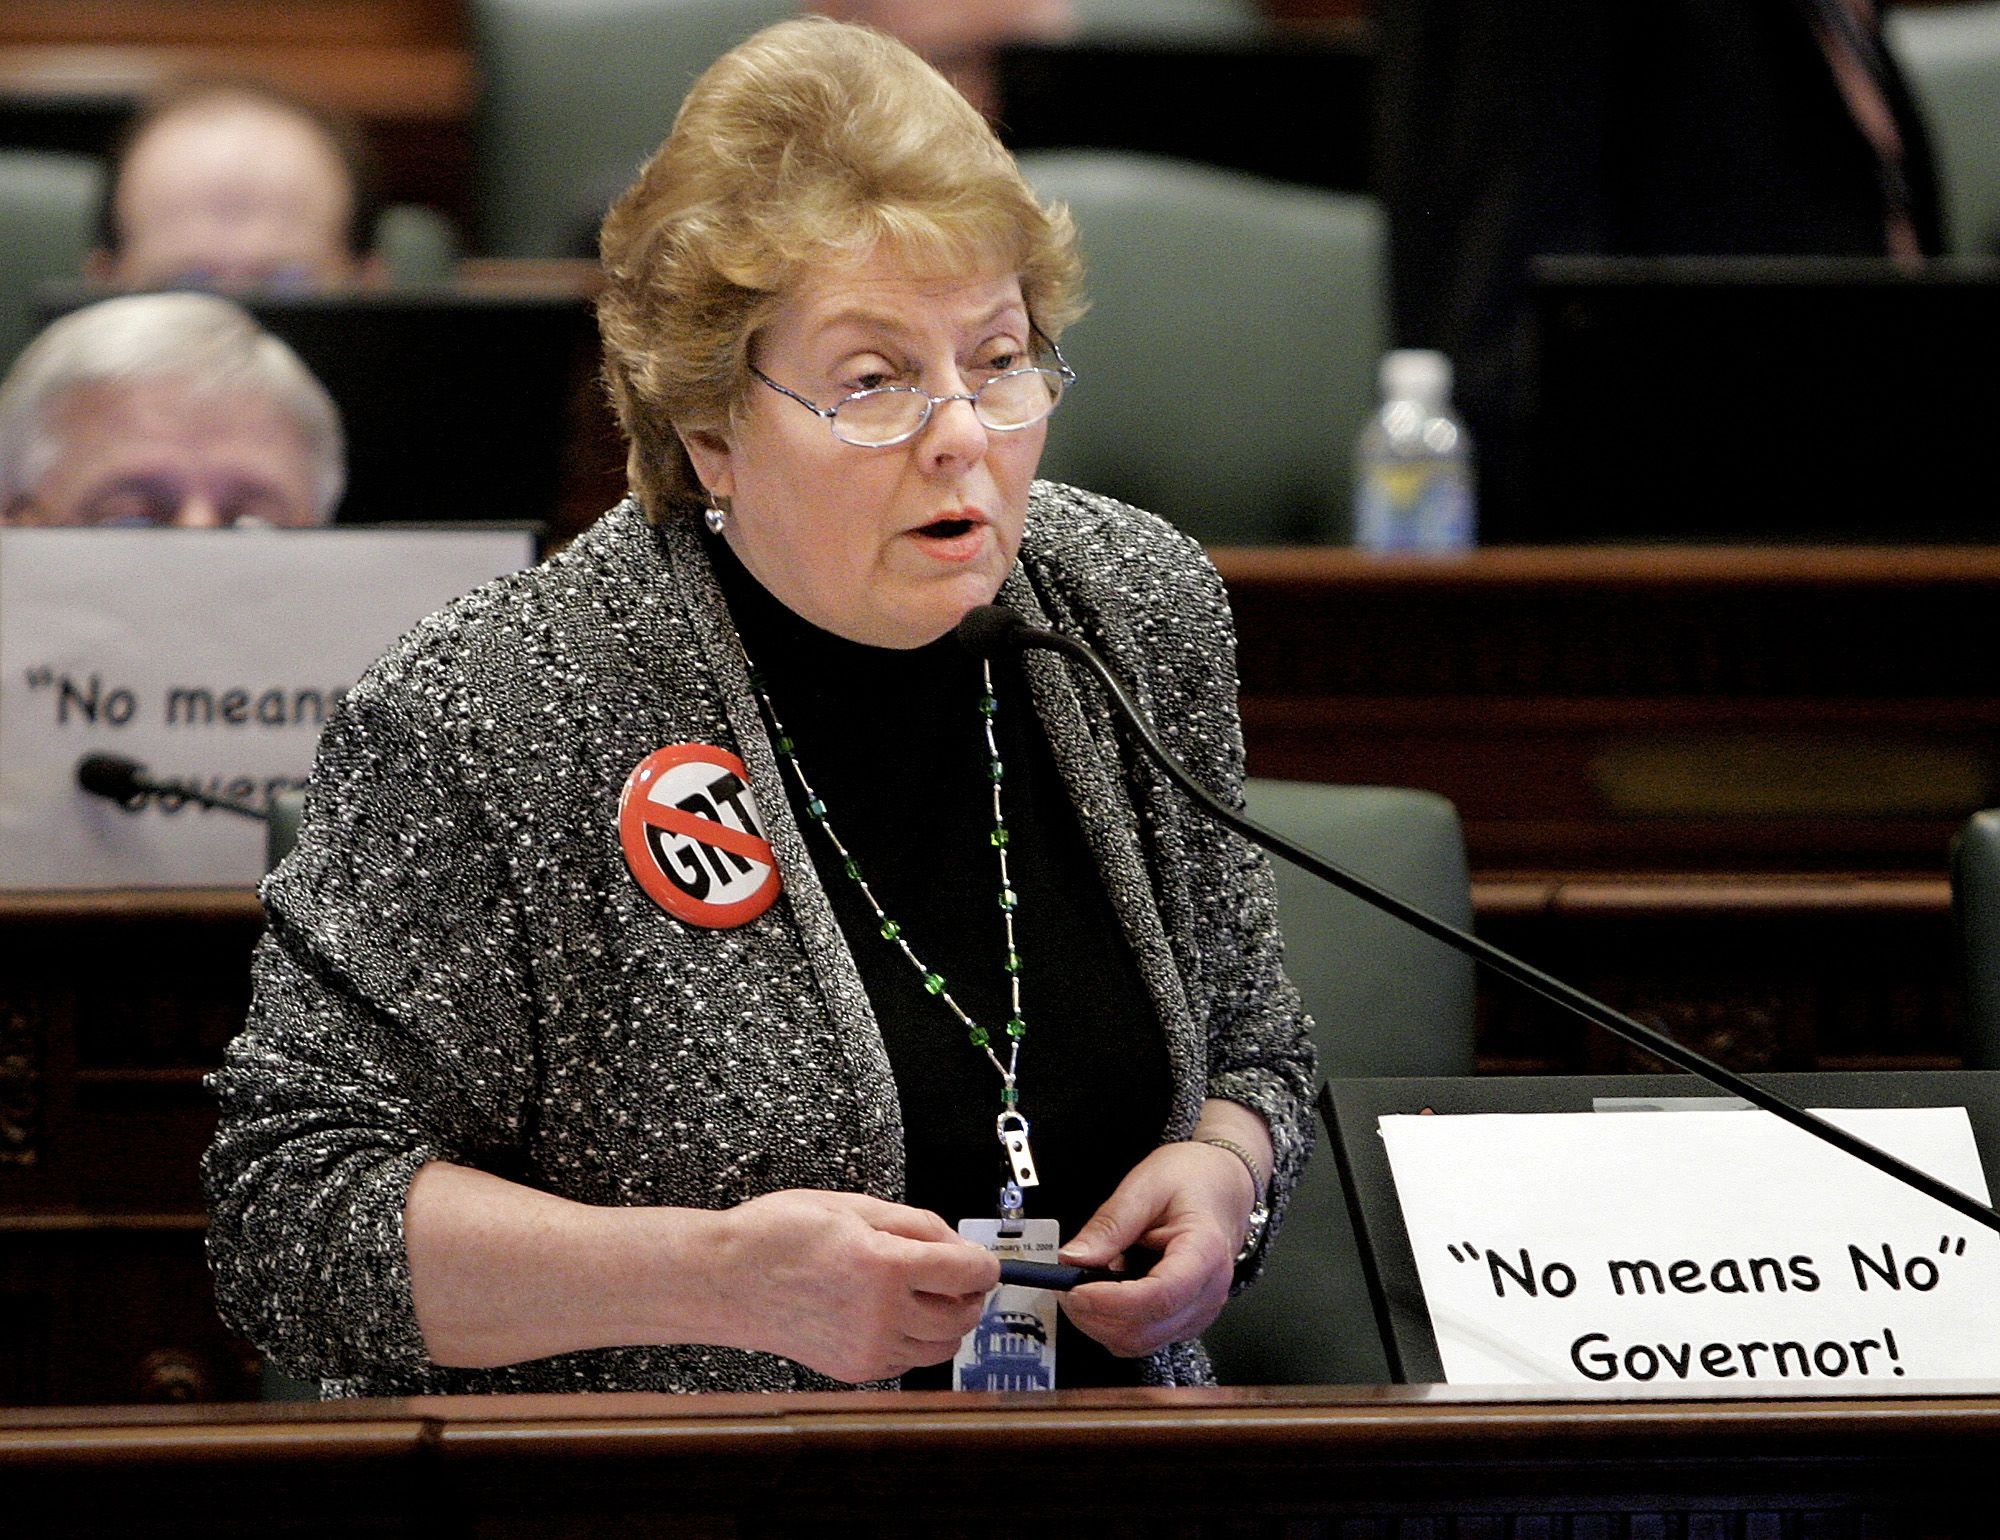 Illinois Rep. Rosemary Mulligan, R-Des Plaines, at the Illinois State Capitol in Springfield, Ill., on May 10, 2007. Two years later, when the Video Gaming Act moved to the House, Mulligan was the only representative who questioned what the state would do to combat gambling addiction. (AP Photo/Seth Perlman)